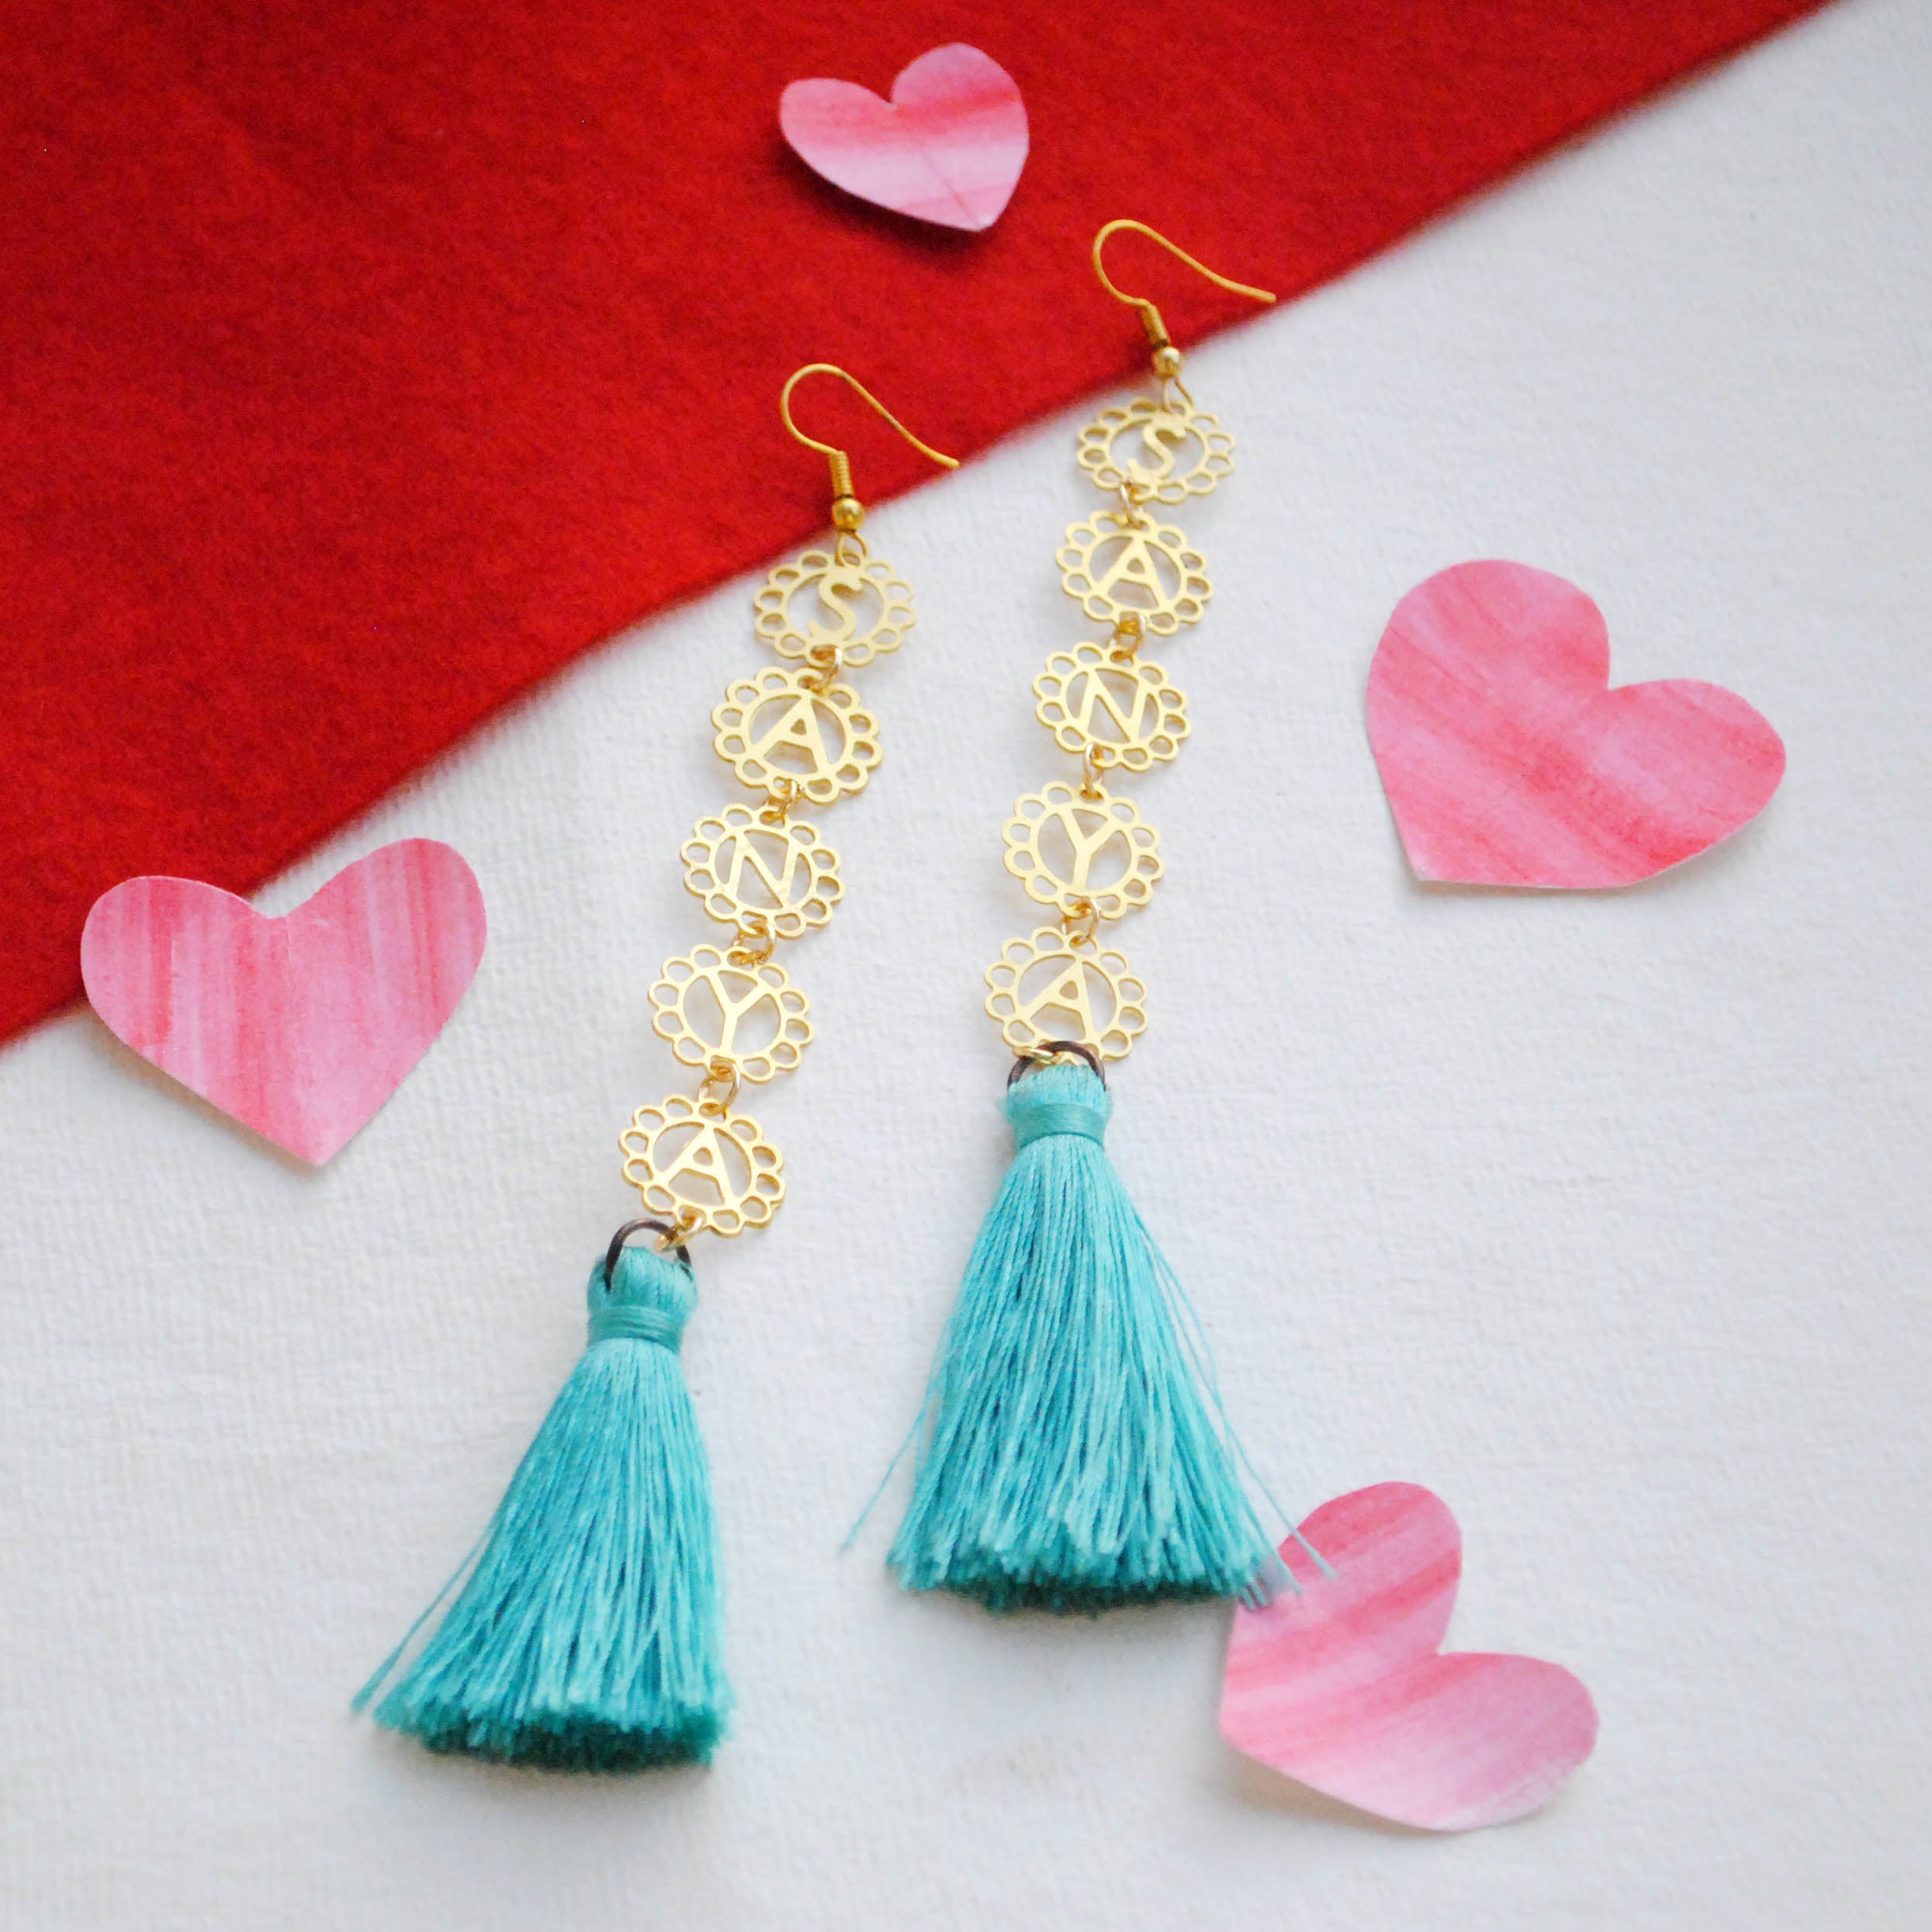 Floral Name Earrings with Tassels